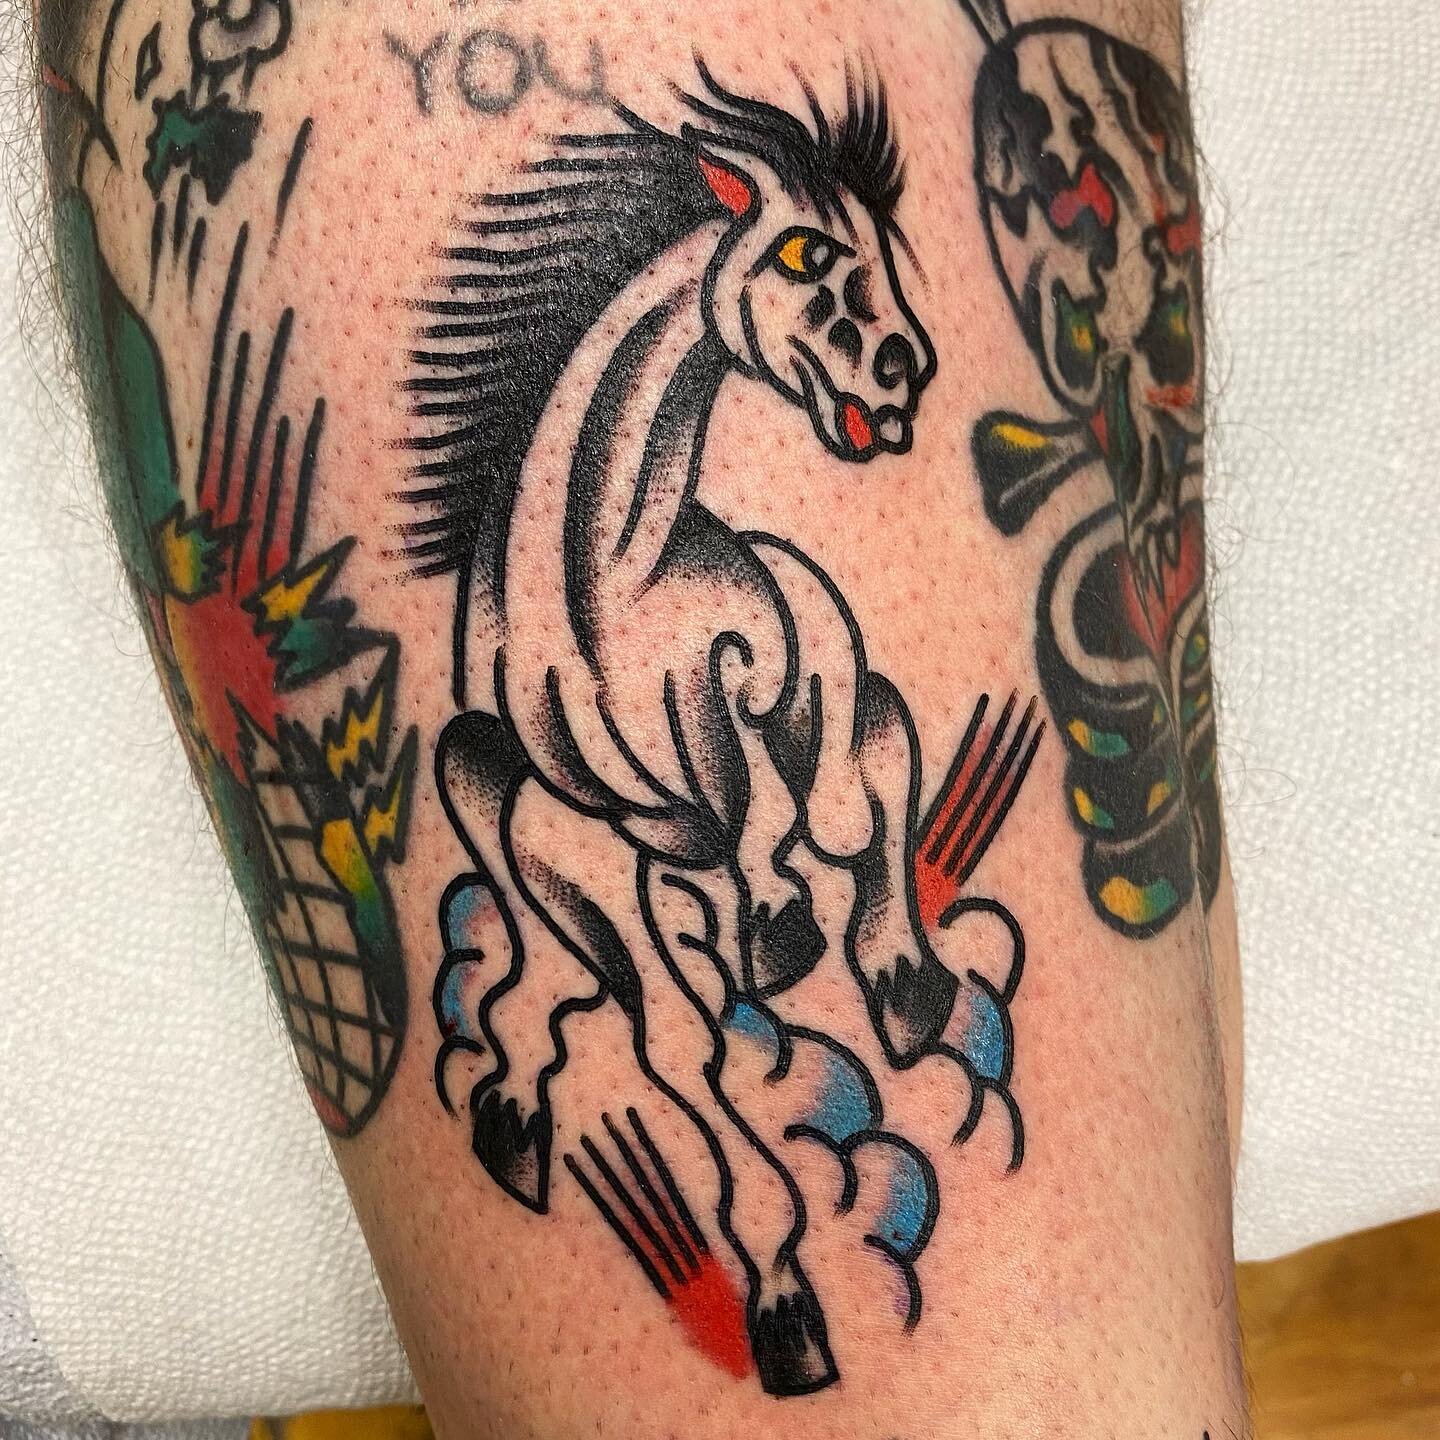 Hyper realistic horse made @riversidetattooma, DM for appointments and availability